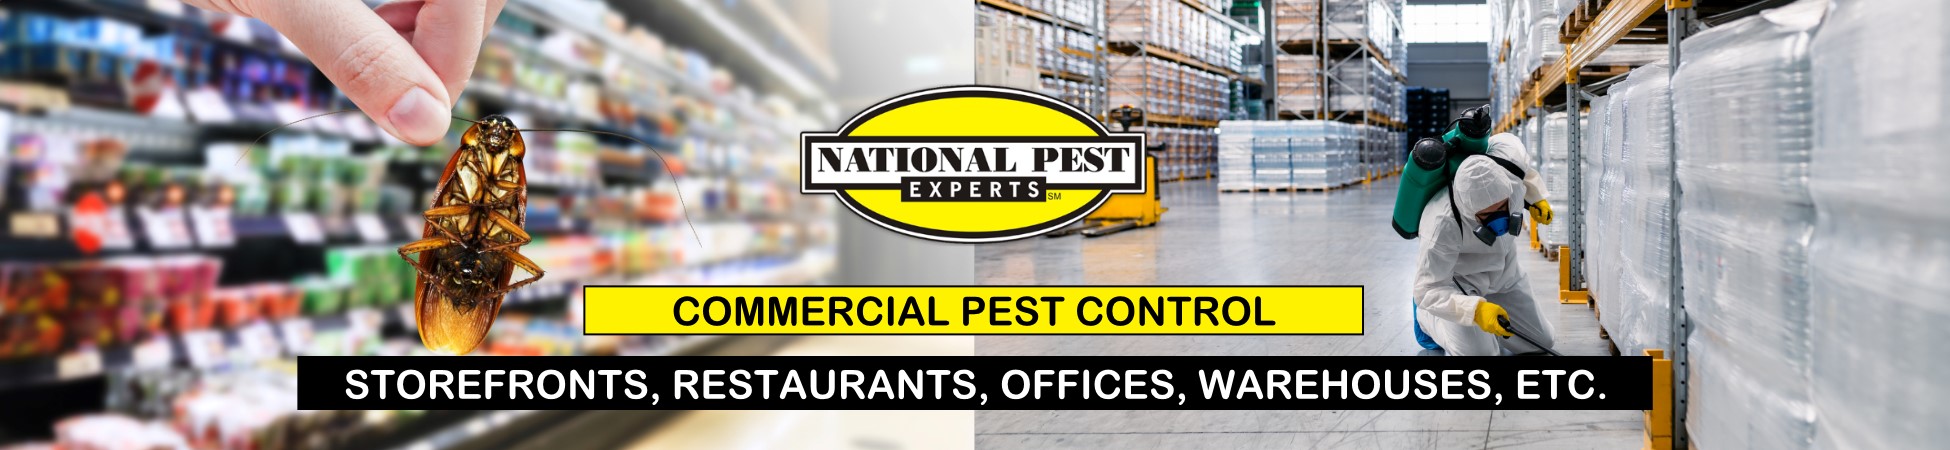 National Pest Experts - Commercial & Industrial exterminating and pest control in North Bellmore, NY